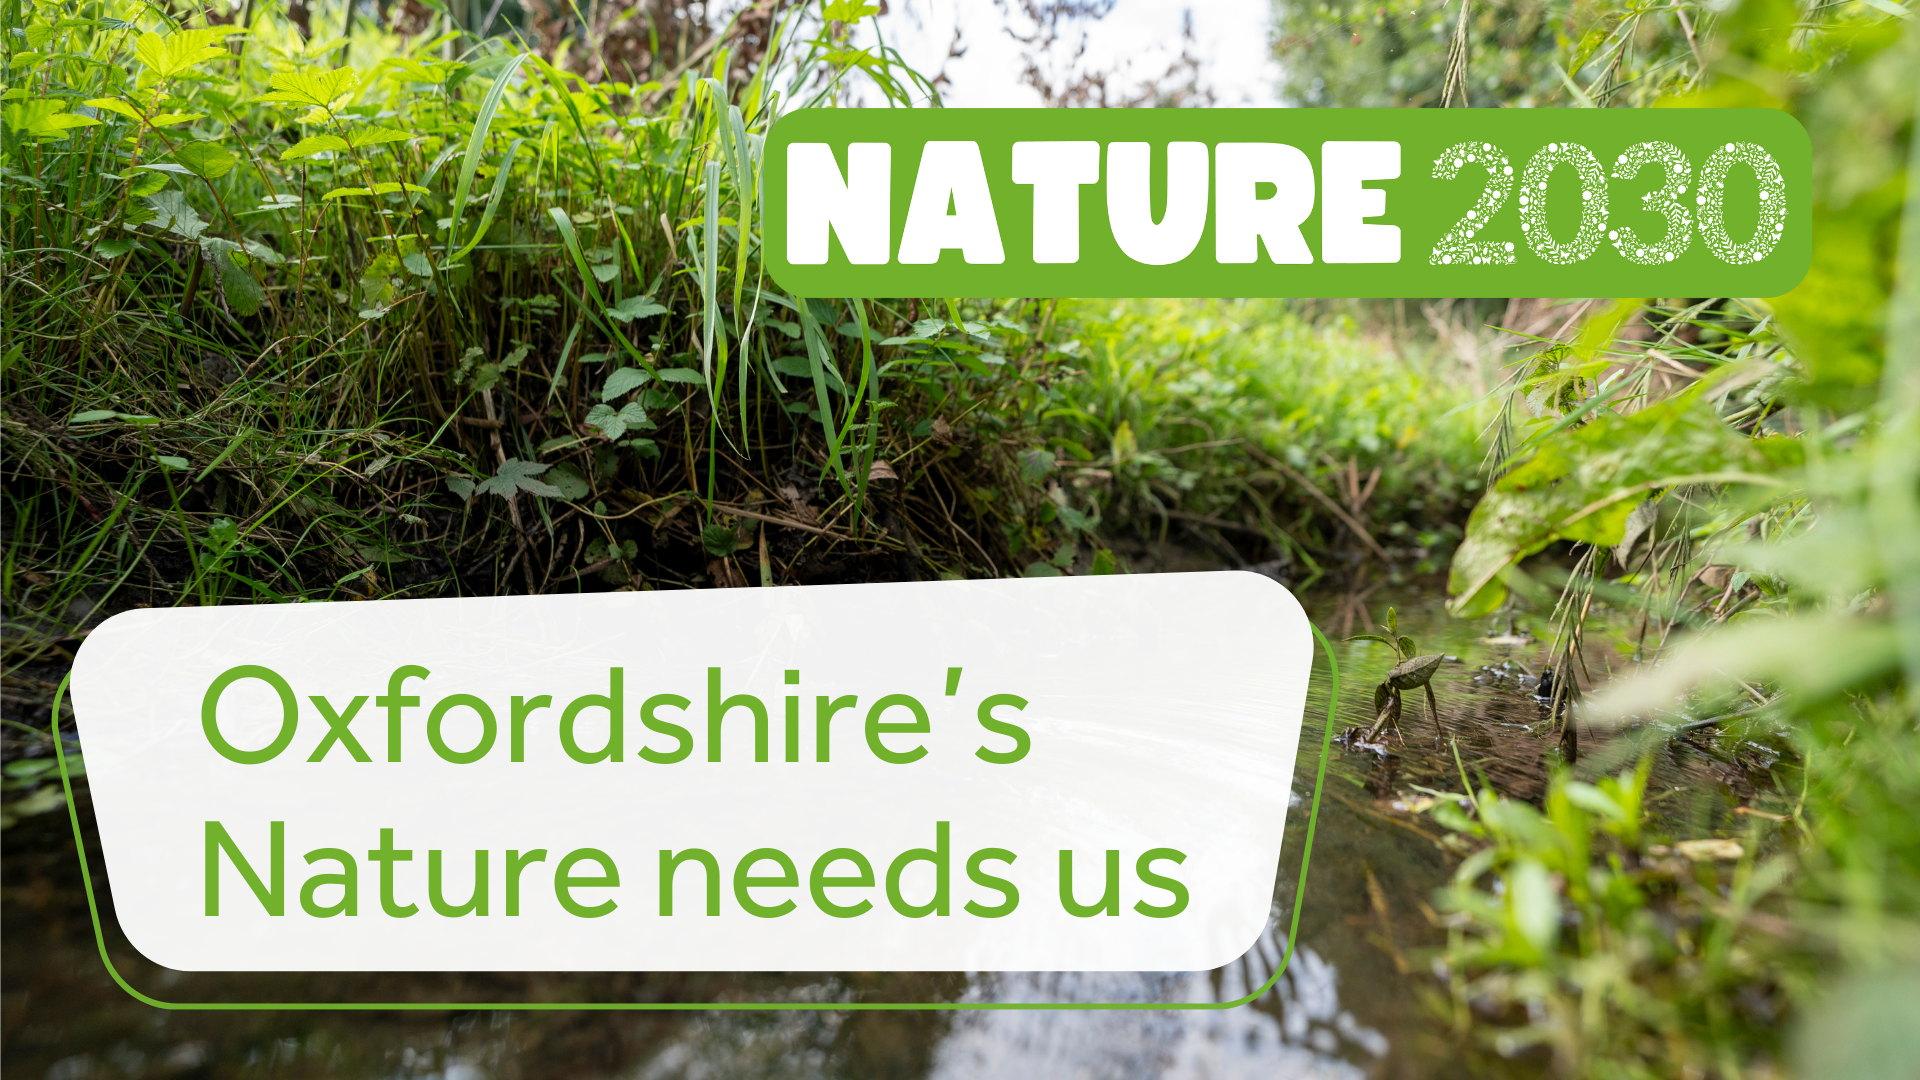 Oxfordshire’s Nature needs us feature